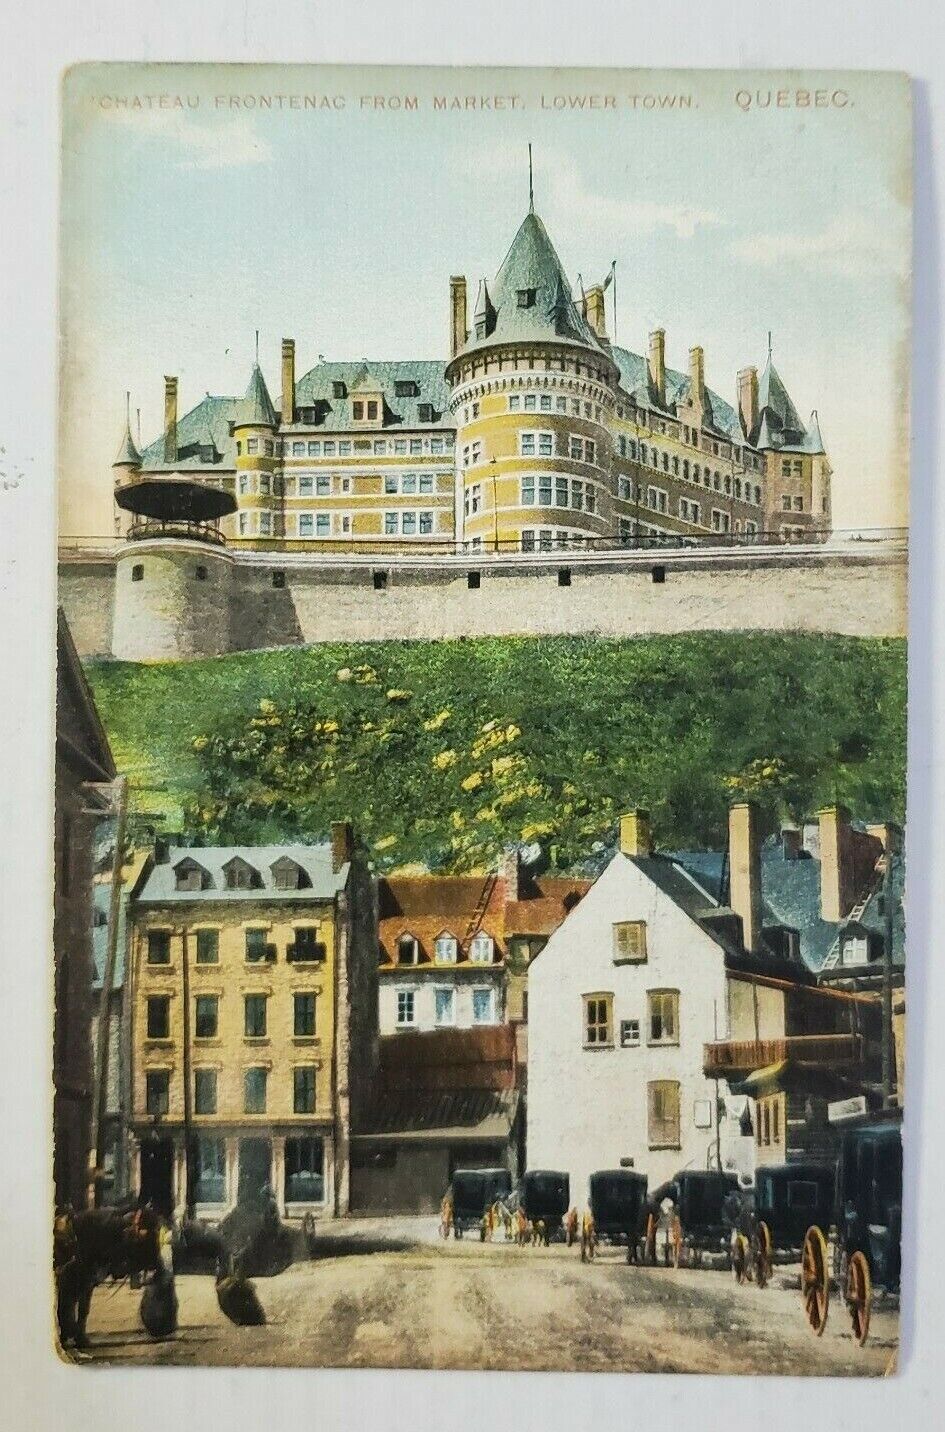 Chateau Frontenac/Lower Town ~ Quebec Canada - Post Card/ Used Posted 7/11/1910